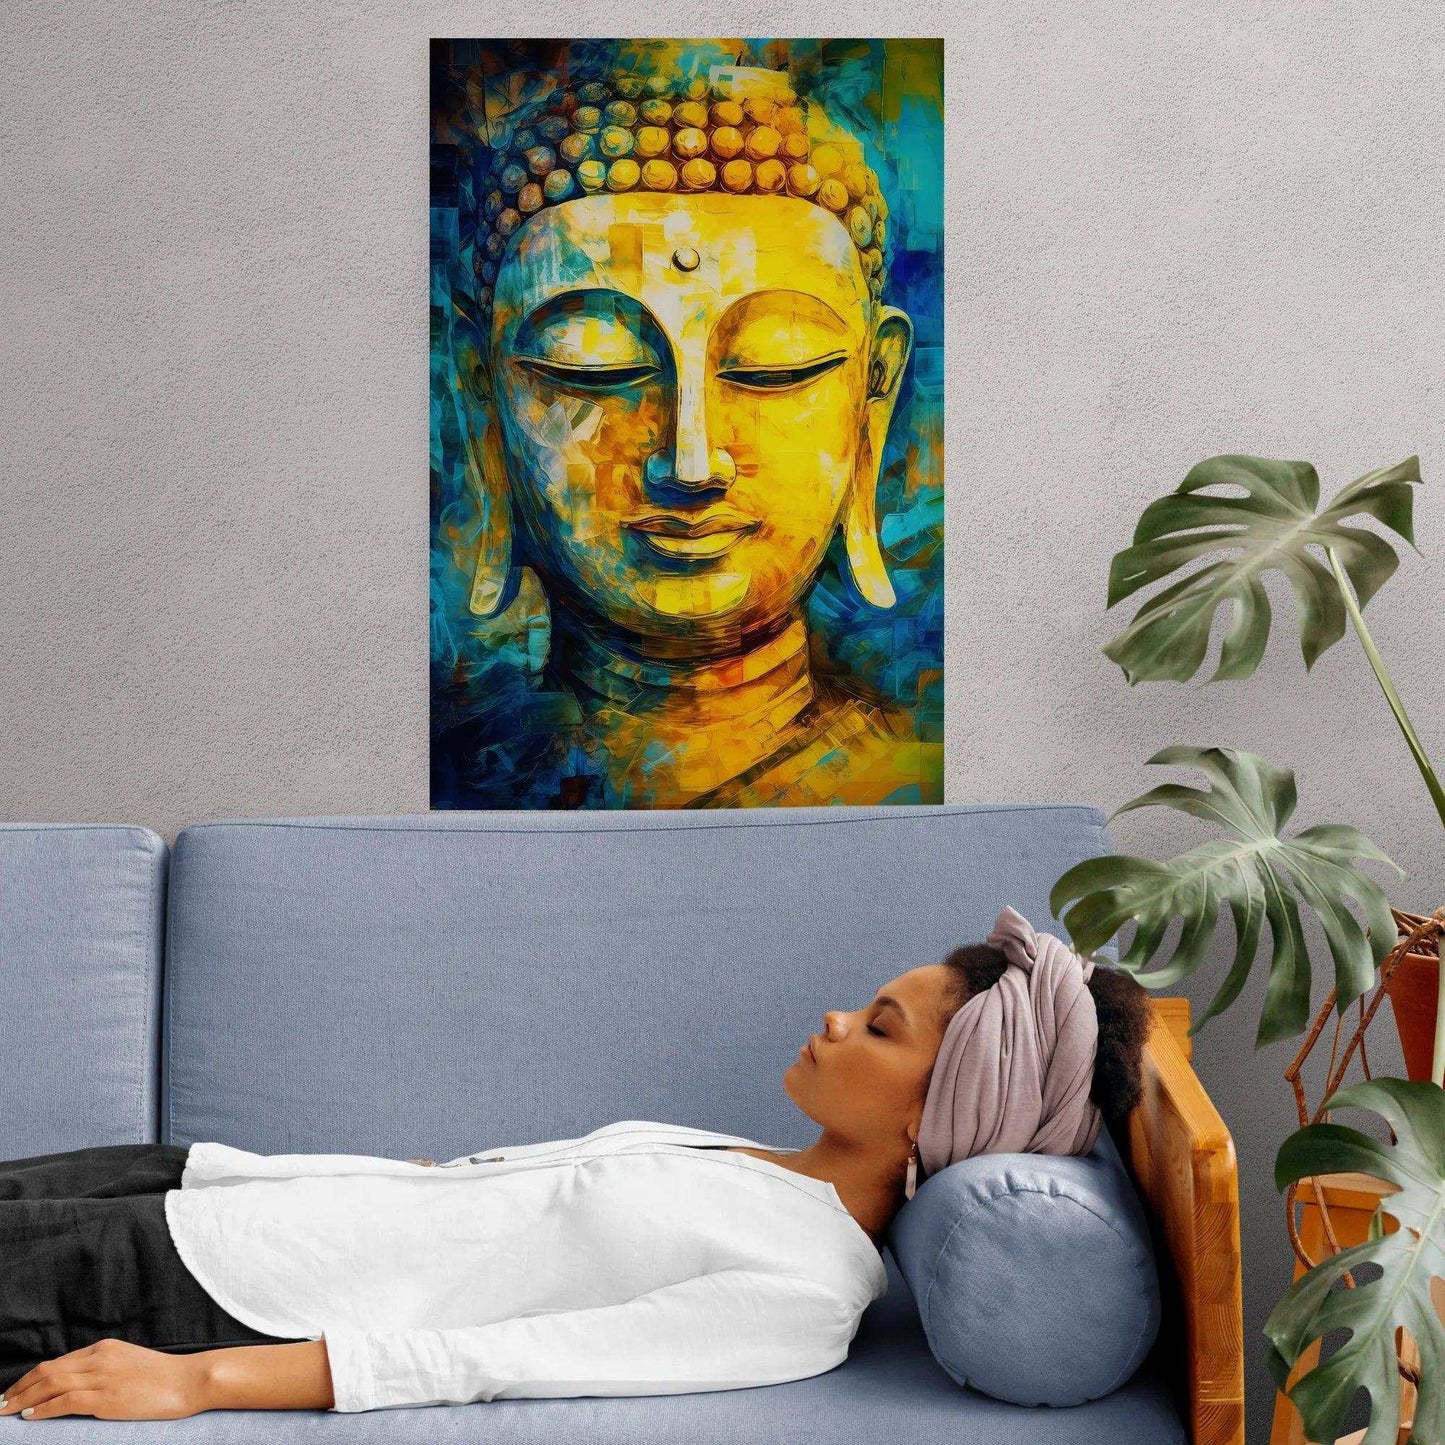 A serene space featuring a vibrantly painted Buddha portrait in rich hues of yellow and blue, displayed over a blue sofa where a woman rests peacefully, with lush green plants adding a touch of vitality to the room.